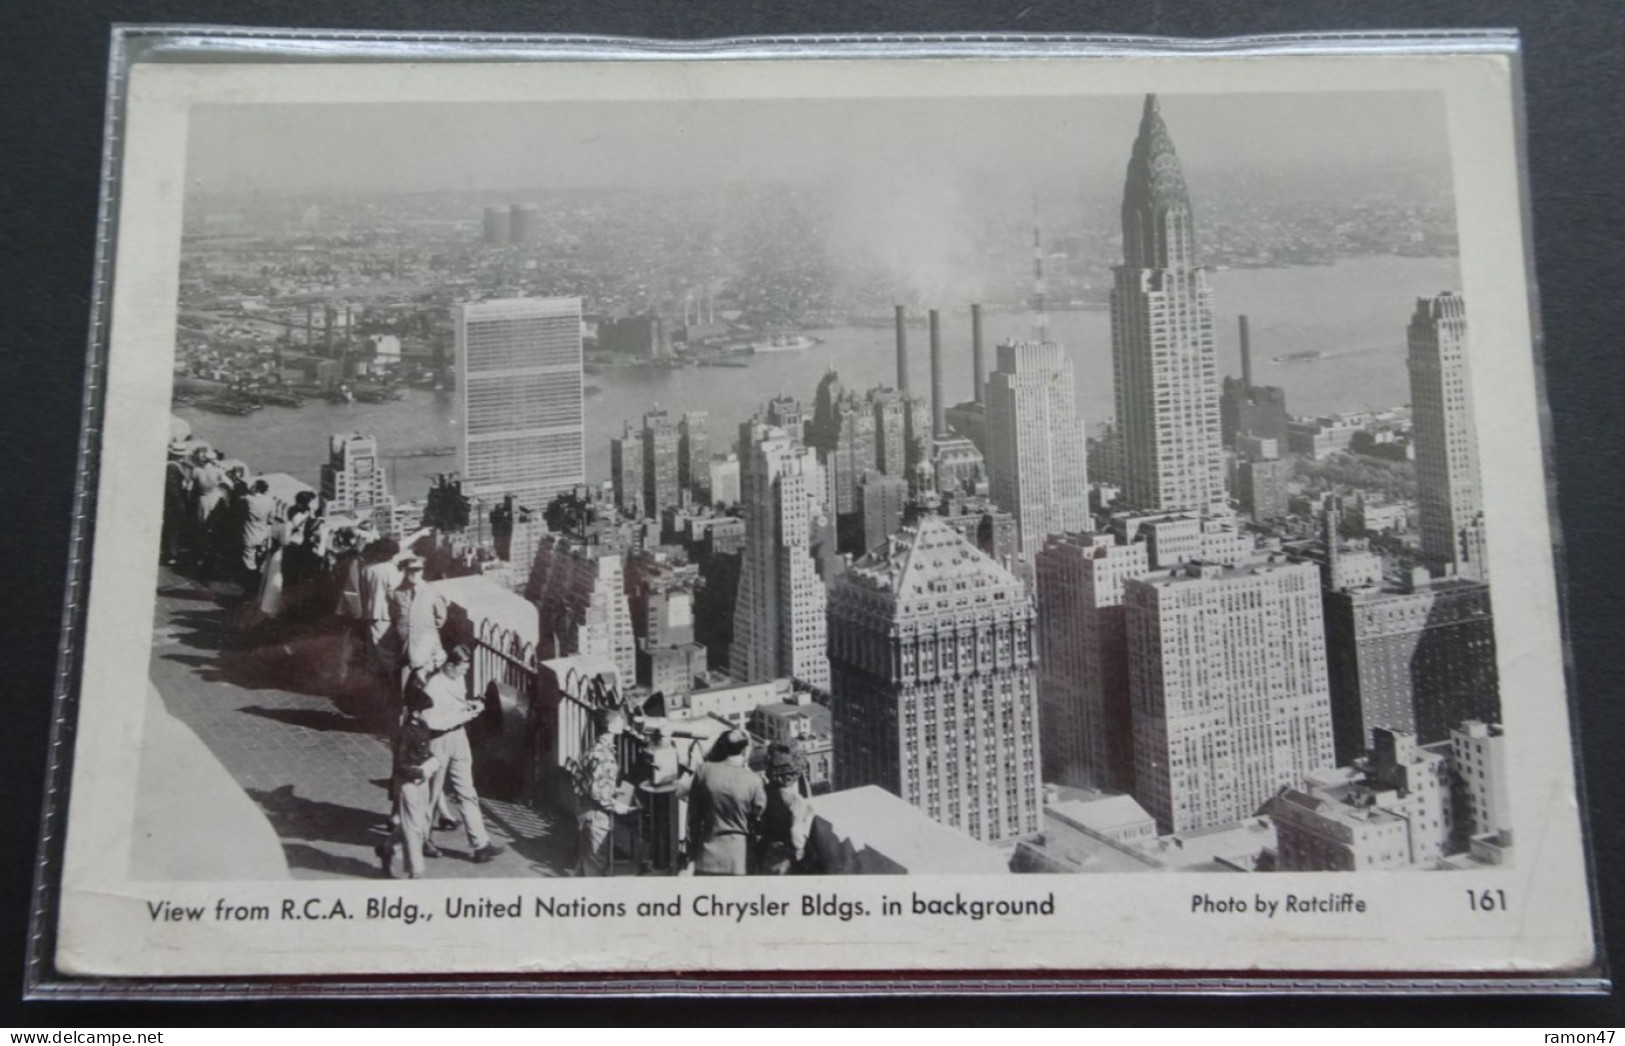 View From R.C.A. Bldg., United Nations And Chrysler Bldgs. In Background - Photo Ratcliffe - # 161 - Chrysler Building